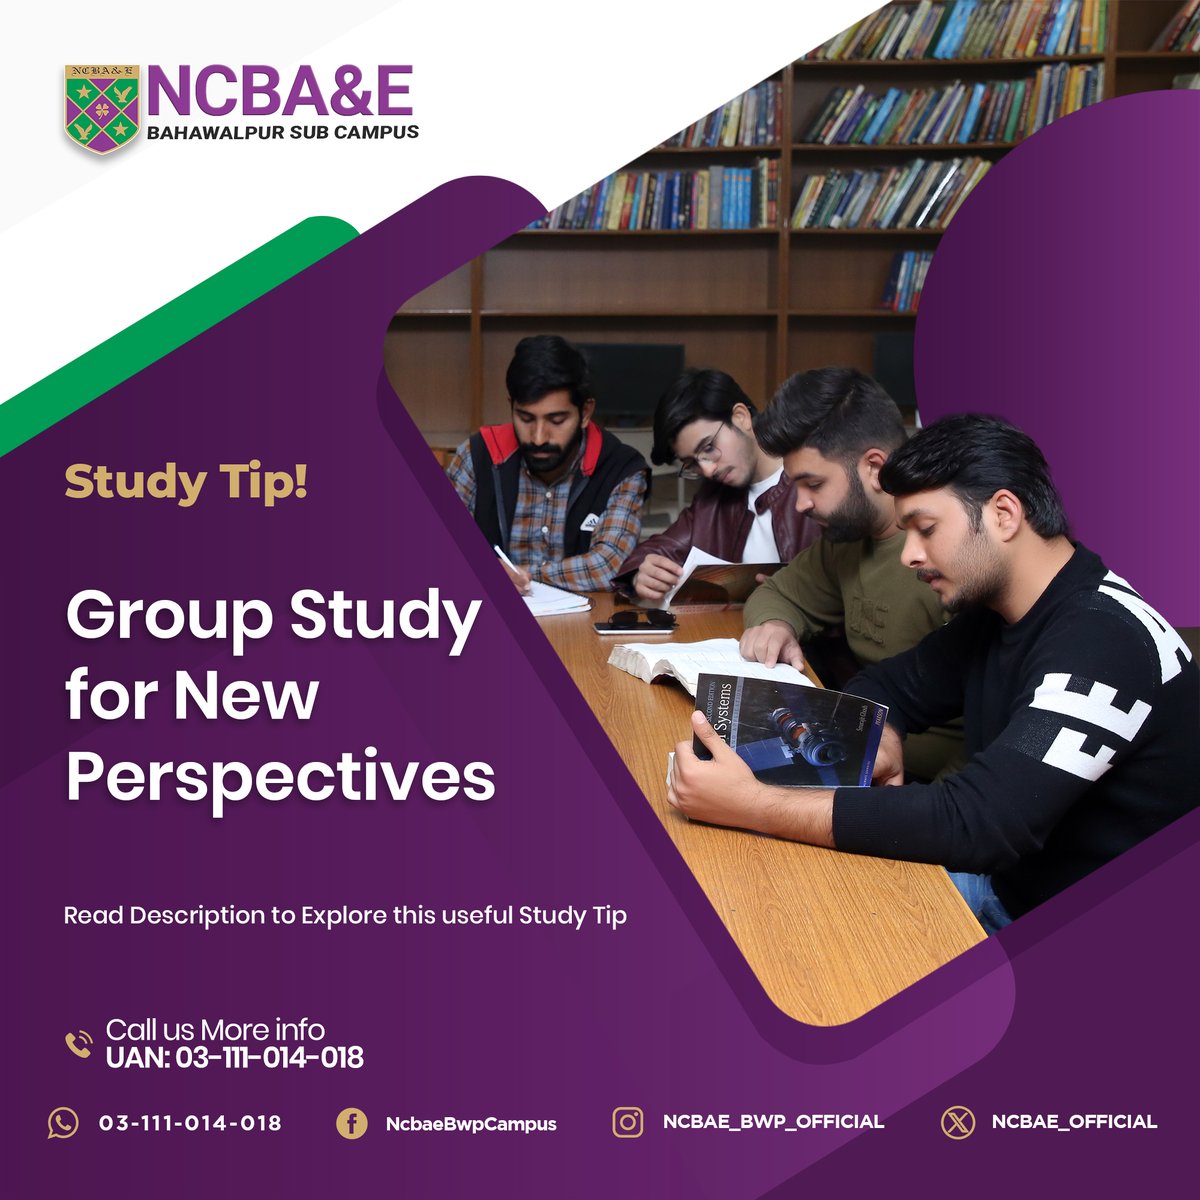 Engage in group study to gain new perspectives and reinforce learning. Choose serious study partners and make the most of it! 👩‍🎓👨‍🎓 #StudyTipsWednesday #GroupStudy #LearnTogether #NCBAEUniversity